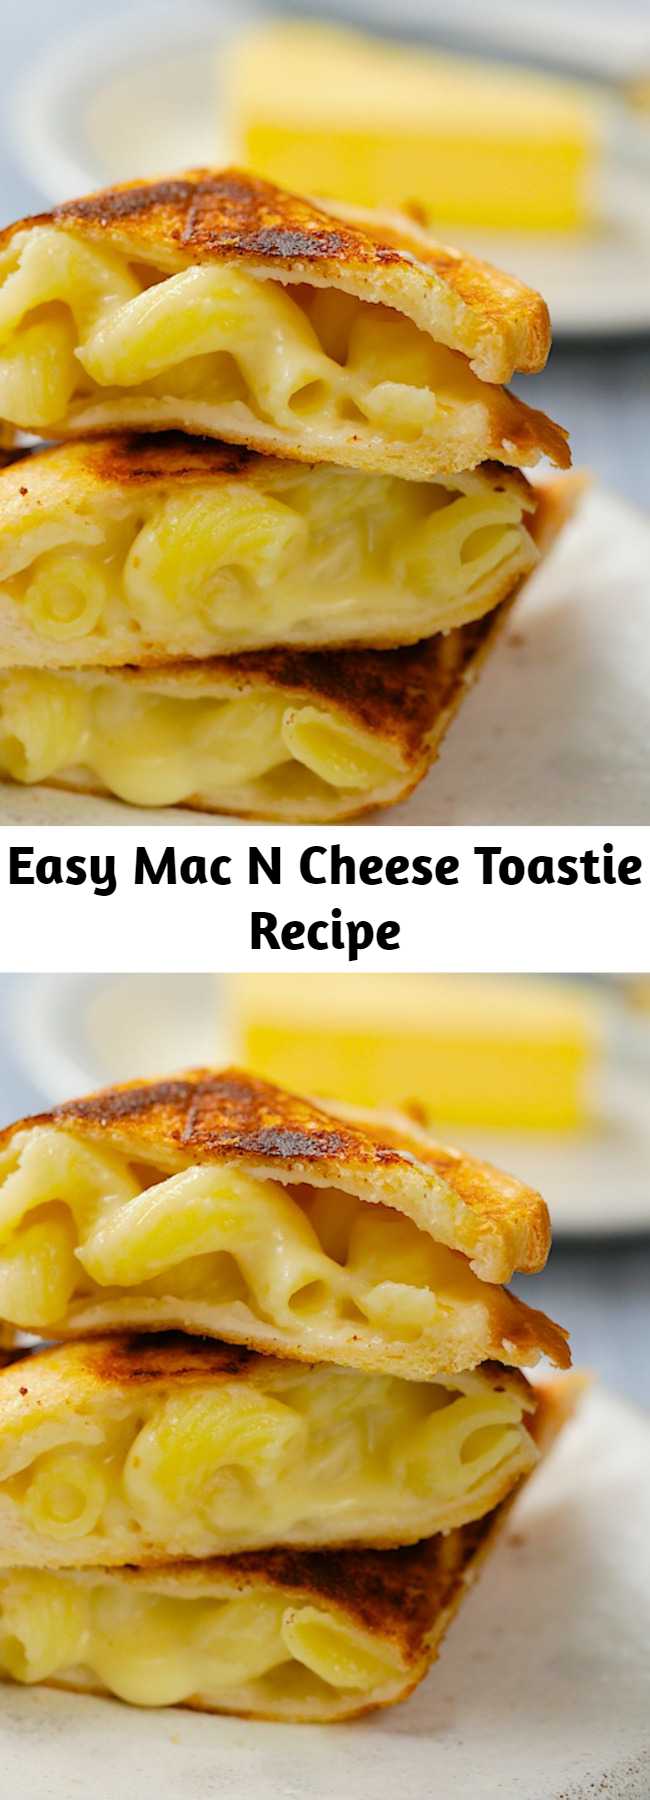 Easy Mac N Cheese Toastie Recipe - What's a better match than a mac n cheese toastie? Was there ever a better match?